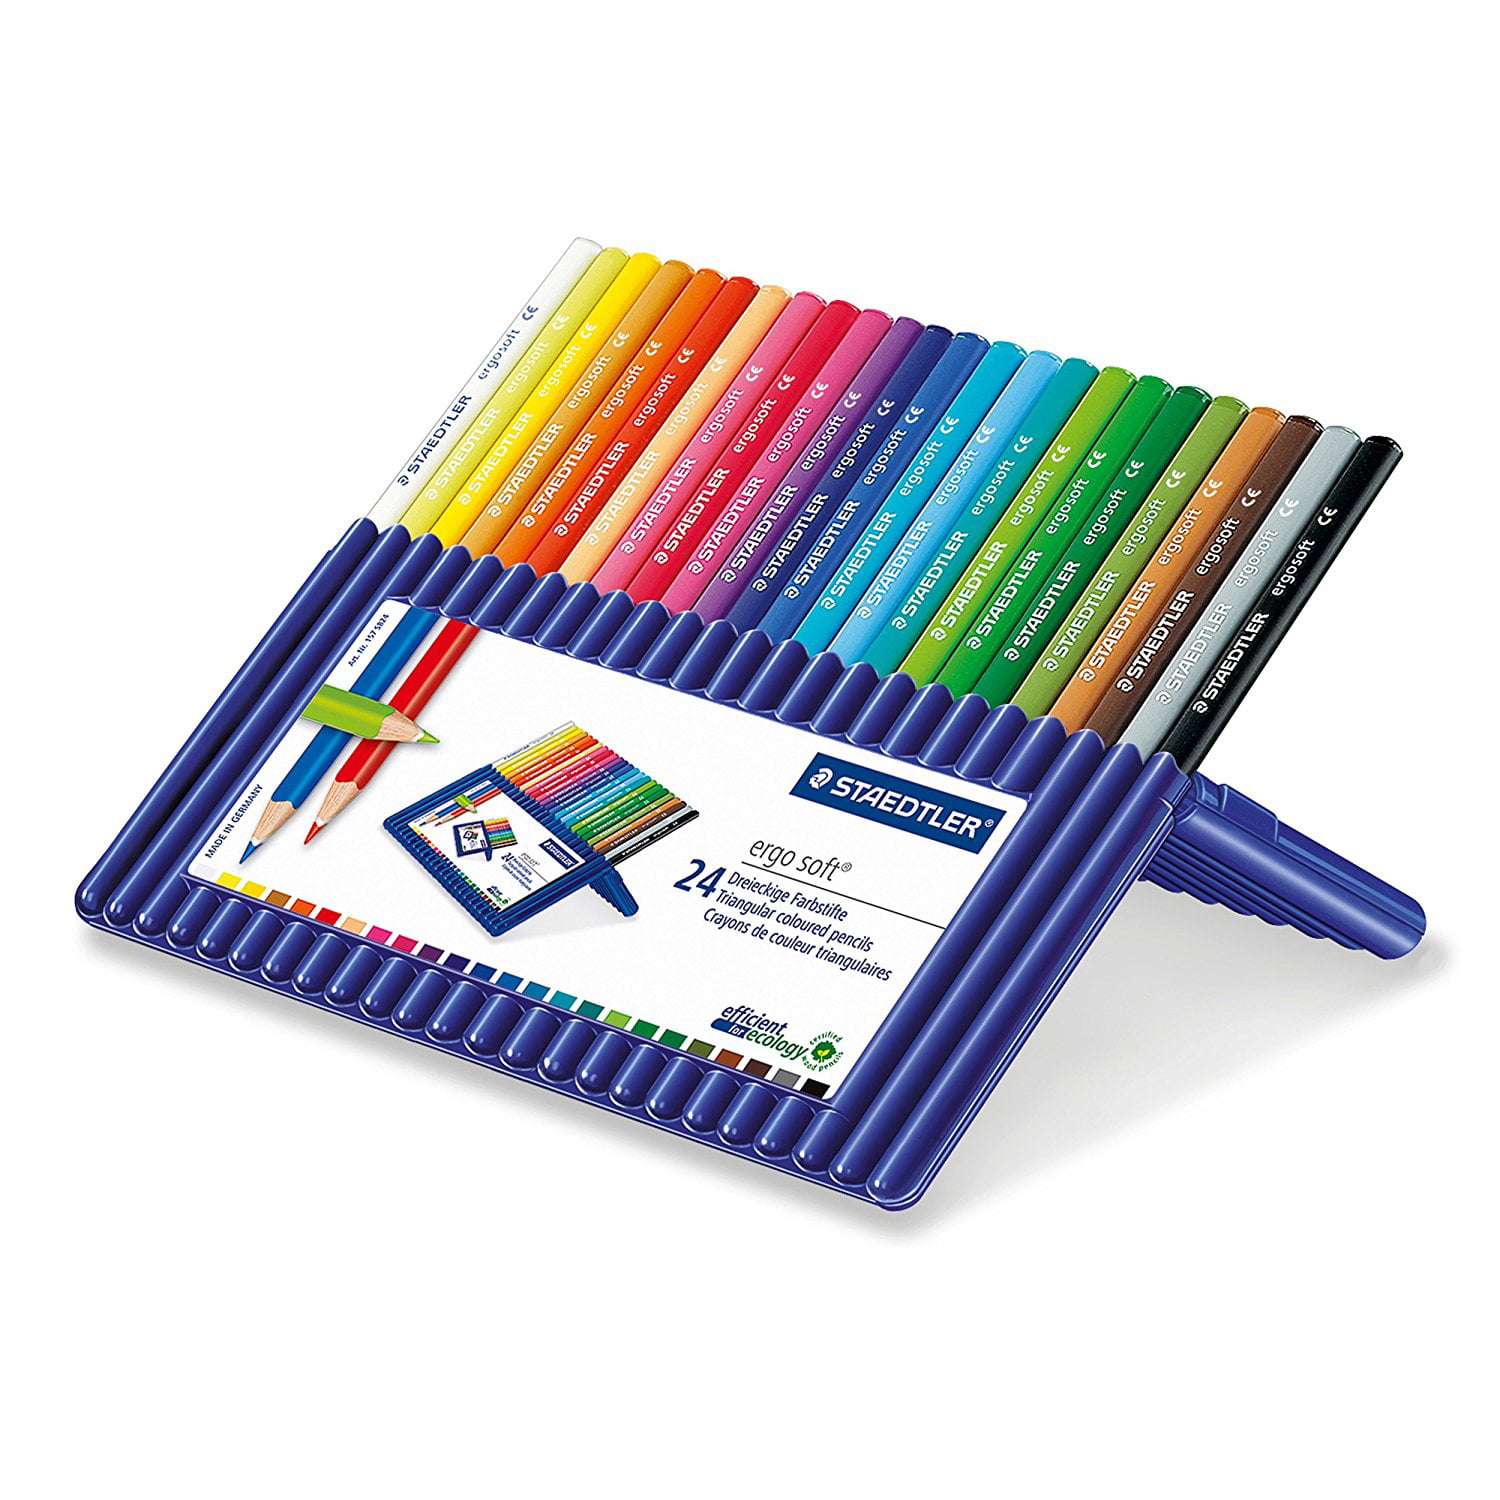 Ergosoft Colored Pencils 157SB24 Set of 24 Colors in Stand-up Easel Case - New 